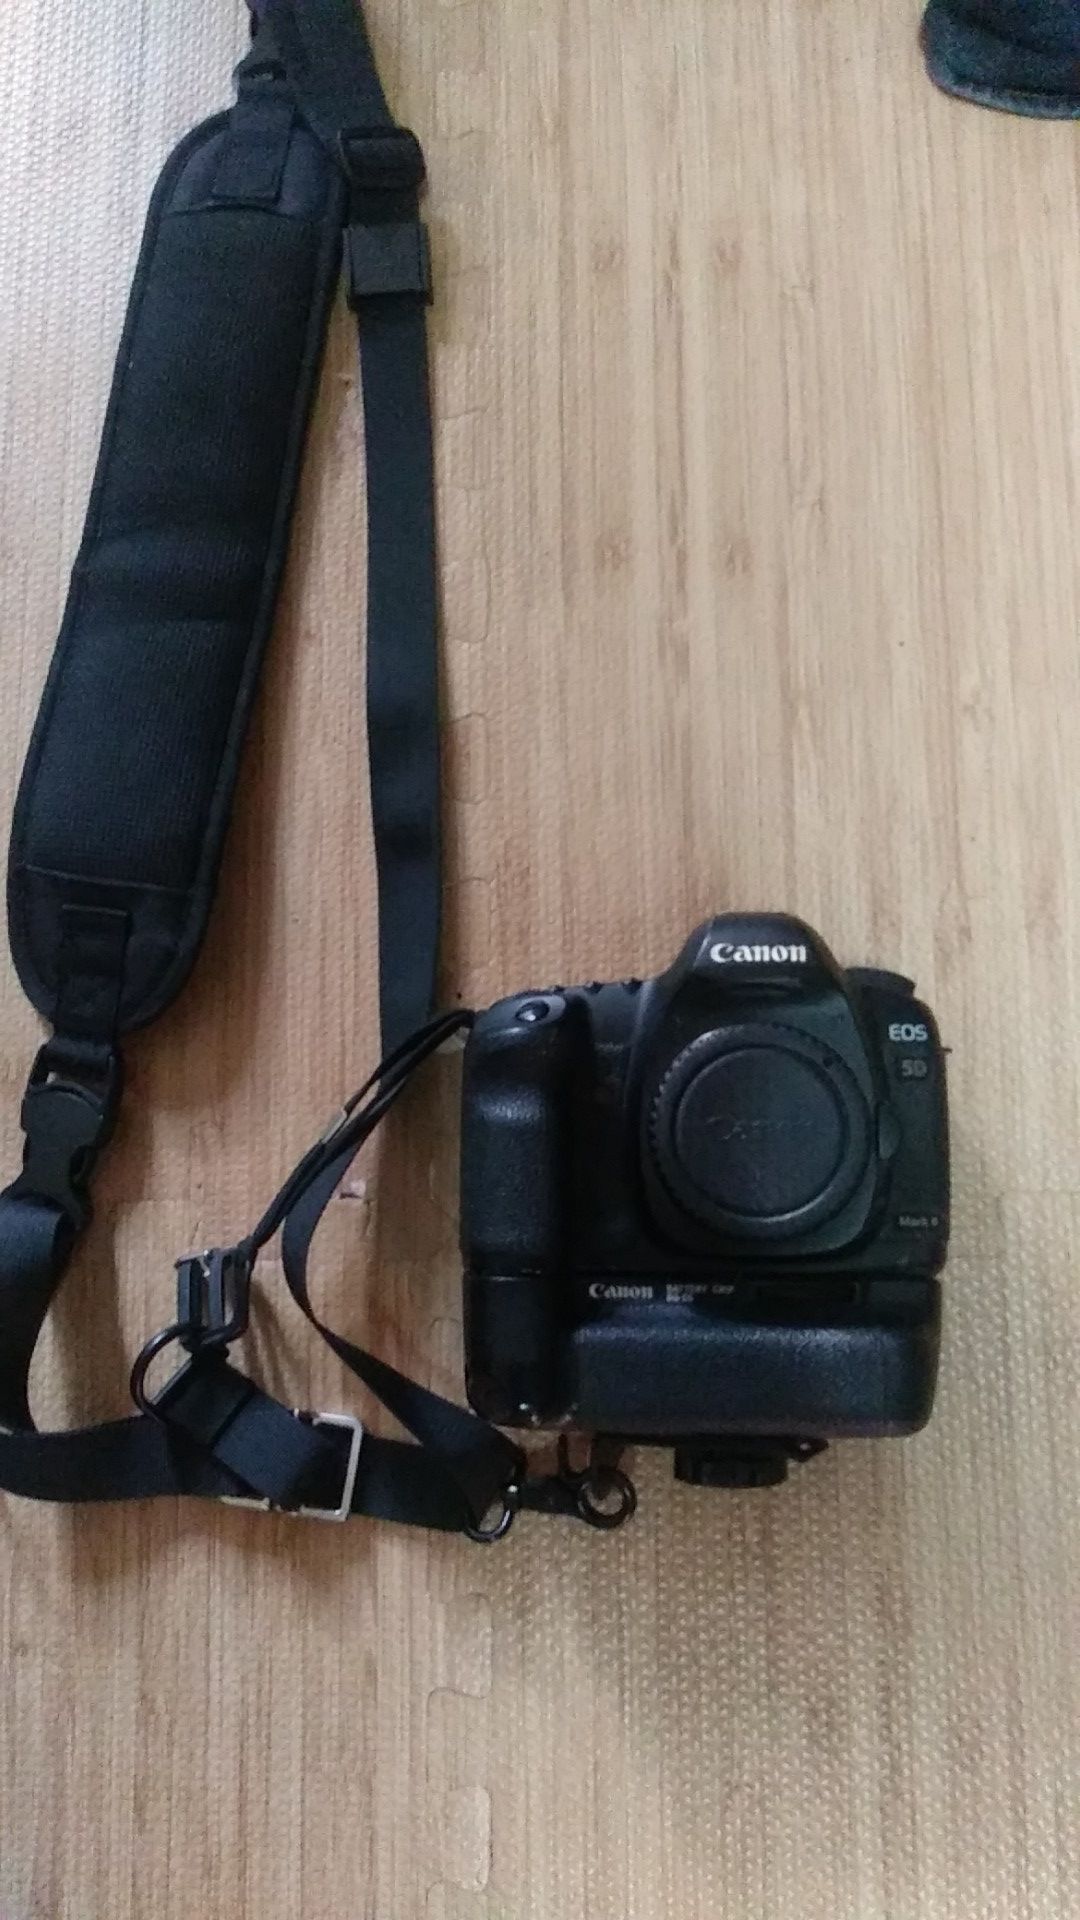 Canon 5d ii with battery grip 2 batteries and Magic Lantern